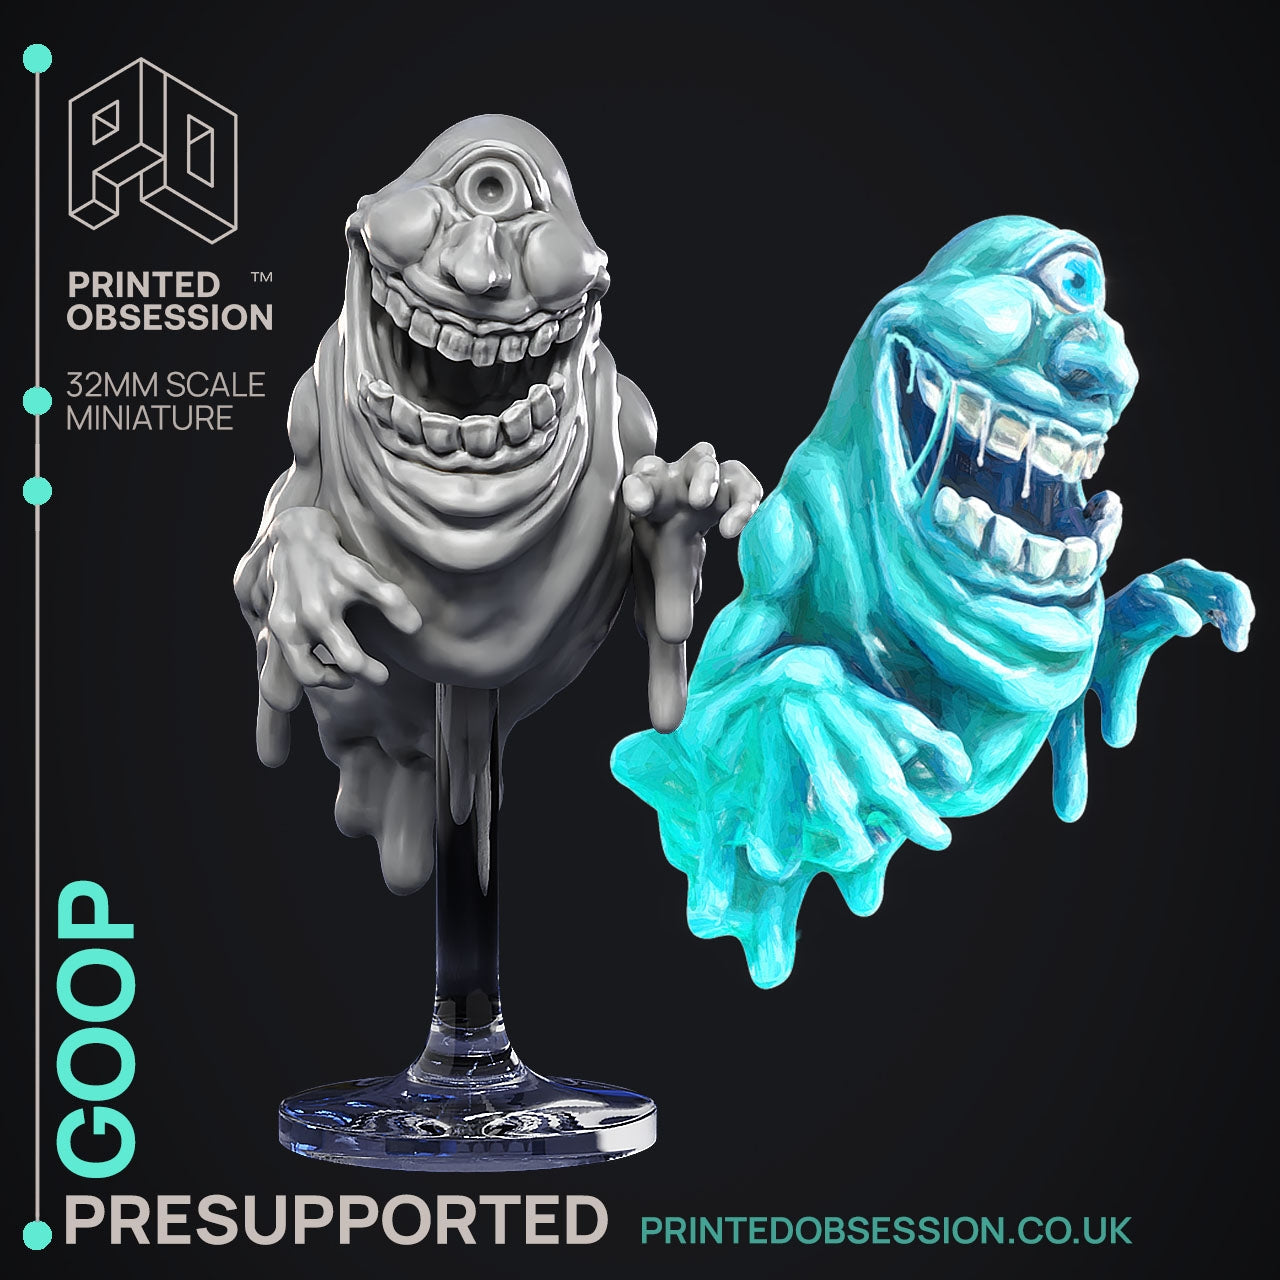 The Ghast Busters Goop - The Printed Obsession - Table-top mini, 3D Printed Collectable for painting and playing!